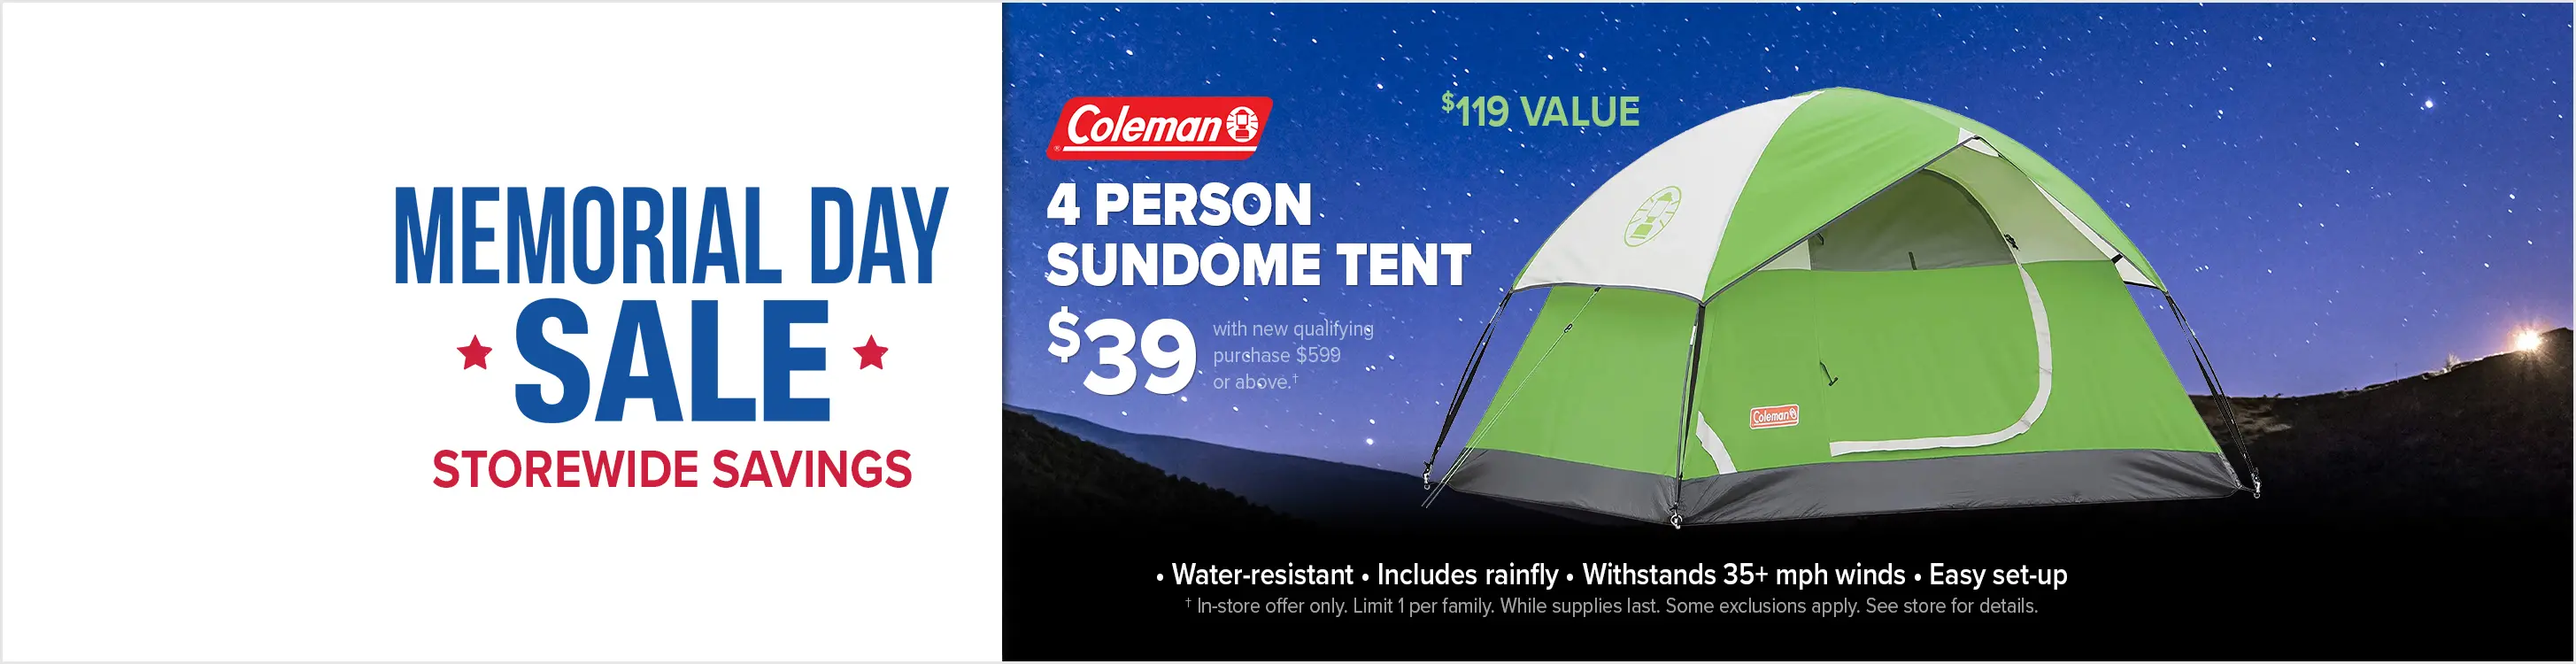 Four Person Coleman Tent for $39 with New Qualifying Purchase of $599 or Above